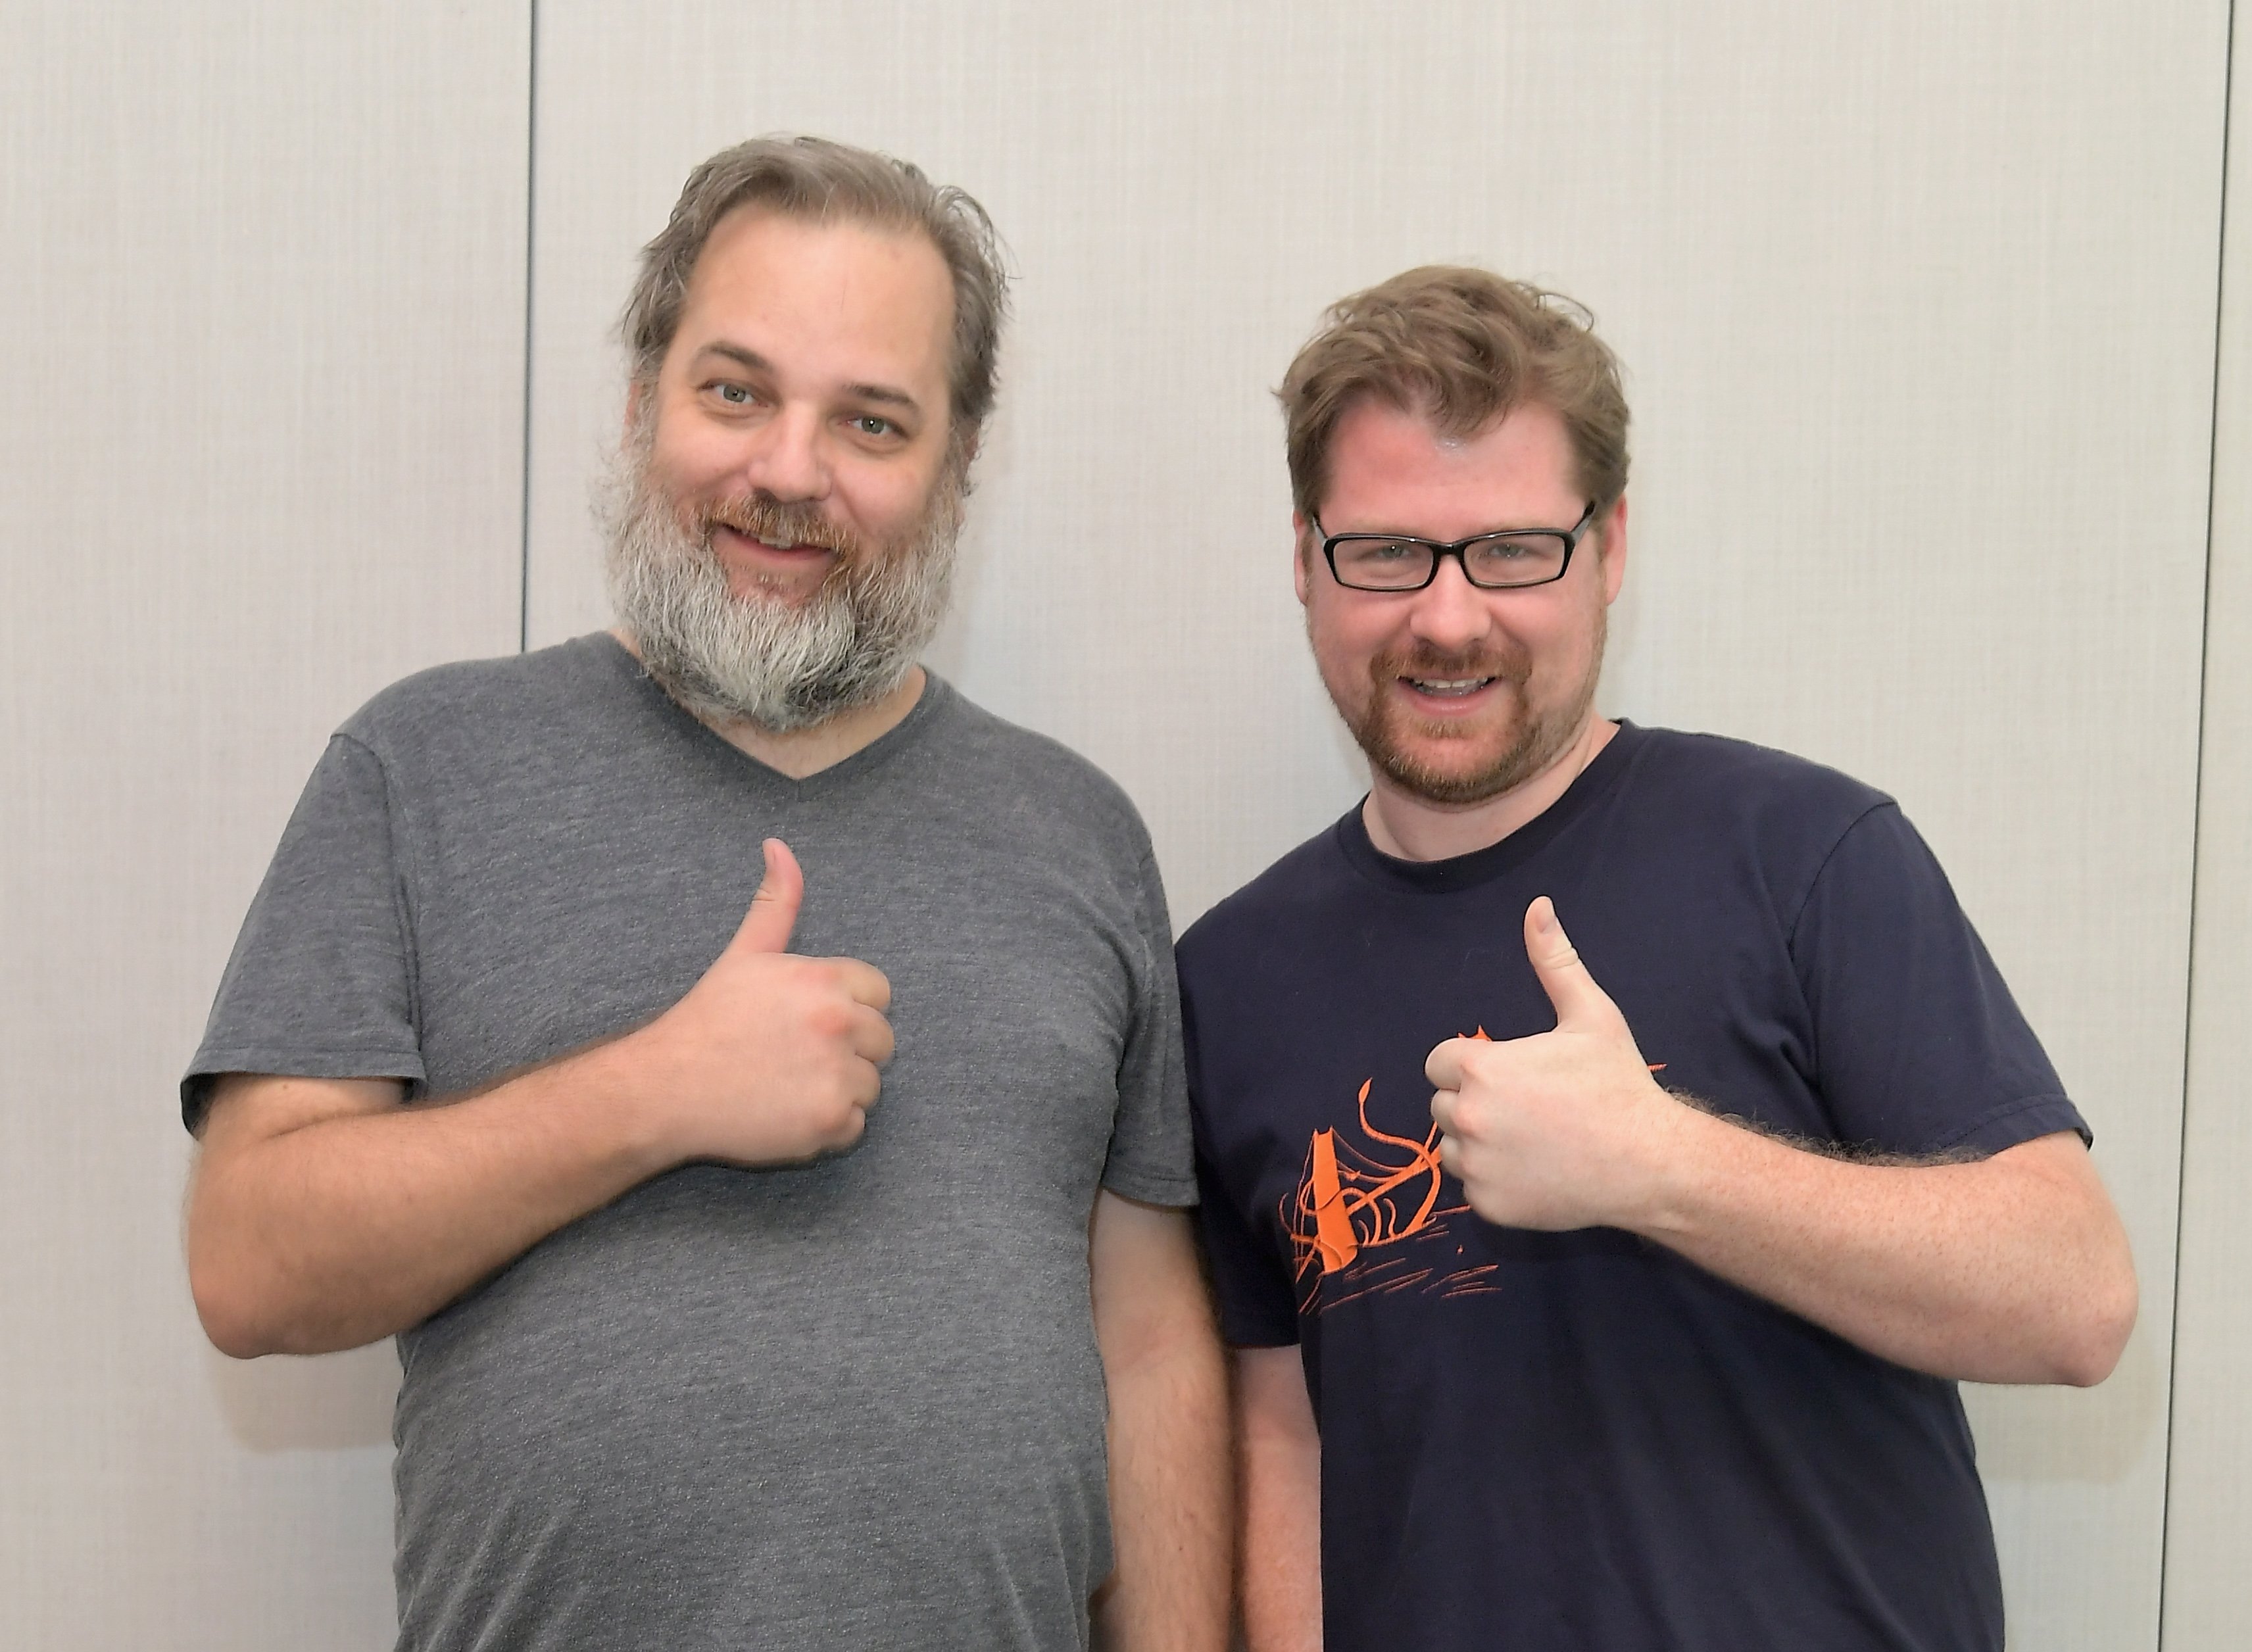 Dan Harmon and Justin Roiland of 'Rick and Morty' give a thumbs up to the camera.